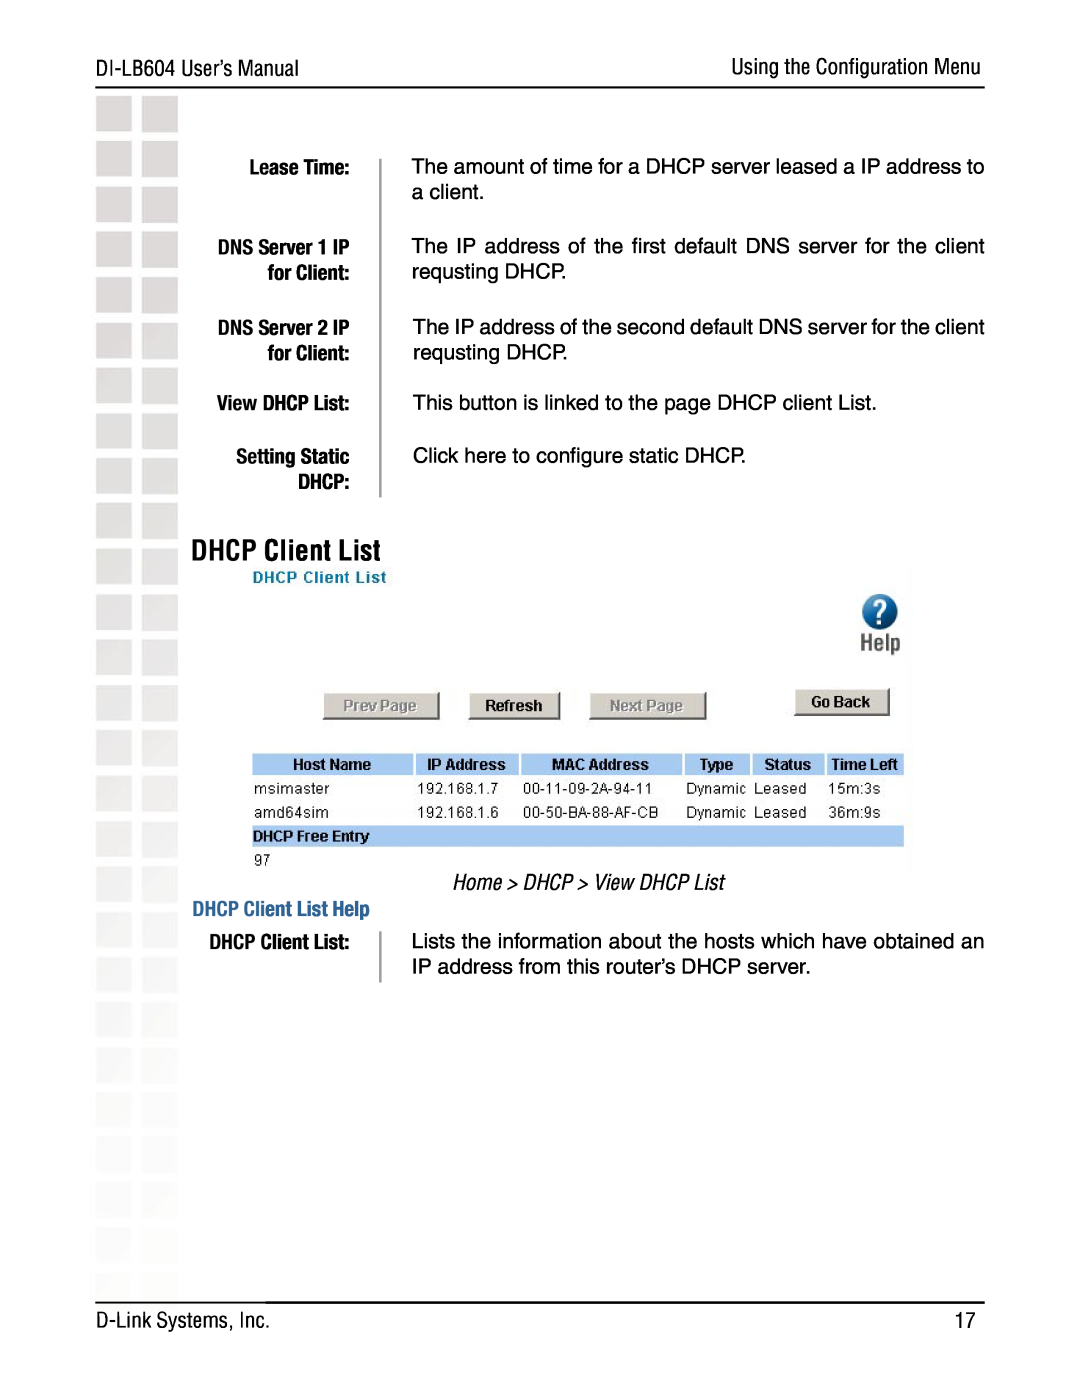 D-Link DI-LB604 manual Lease Time, View DHCP List Setting Static DHCP, DHCP Client List Help, Home DHCP View DHCP List 